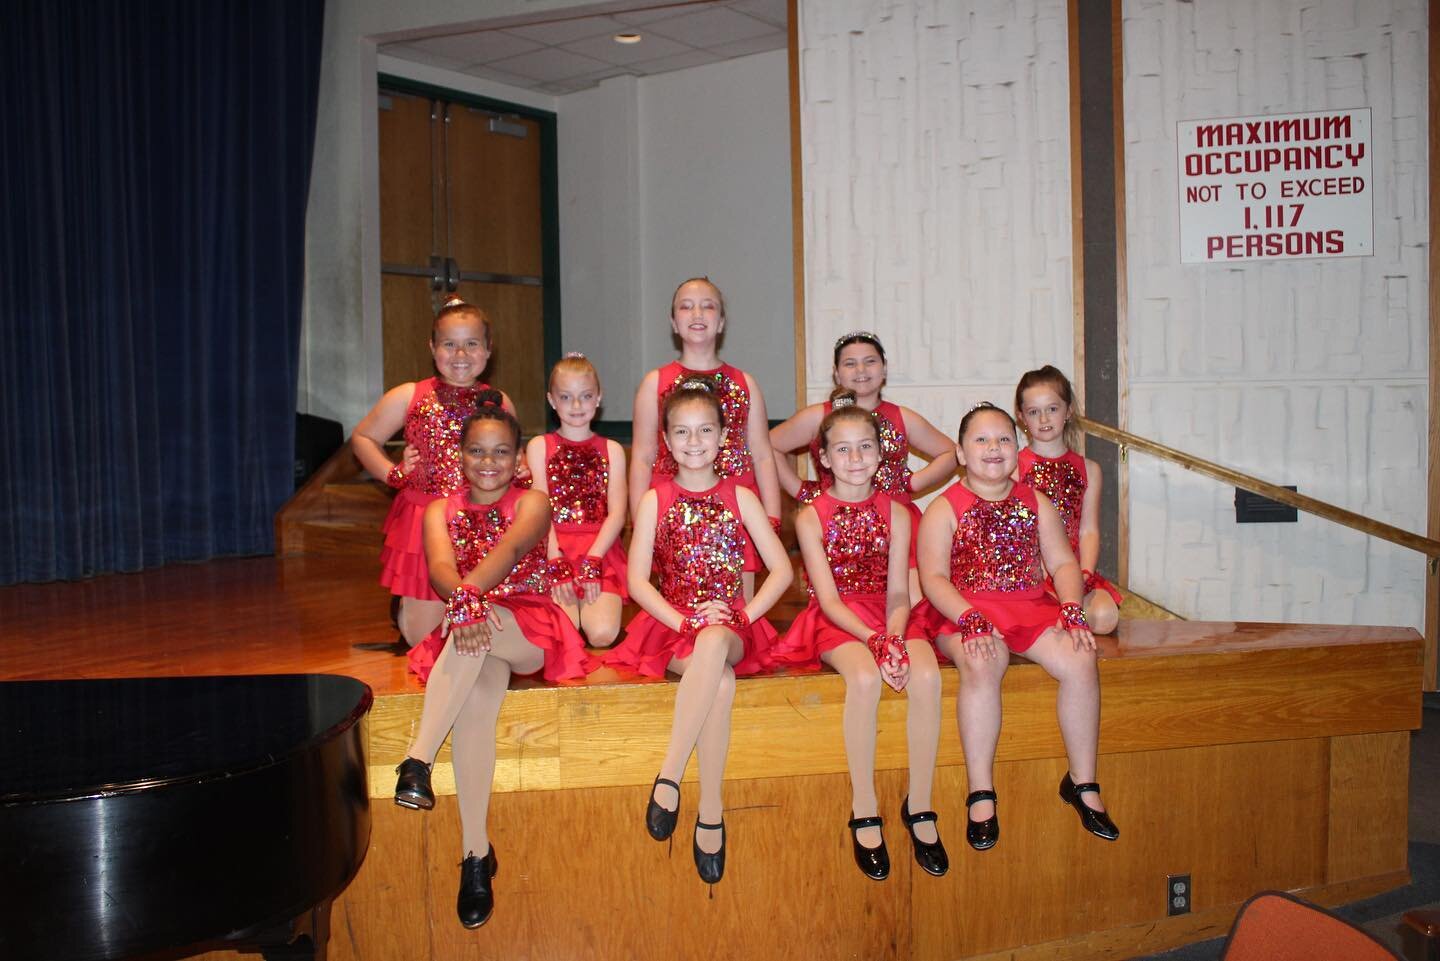 Swipe ⬅️ for some action shots! This lovely group performed three dances in our show this year!! One tap dance, one ballet dance, and one jazz dance. They loved being on the stage and their huge smiles prove it. ❤️💃🕺

#dance #rozsdanceworks #dancin